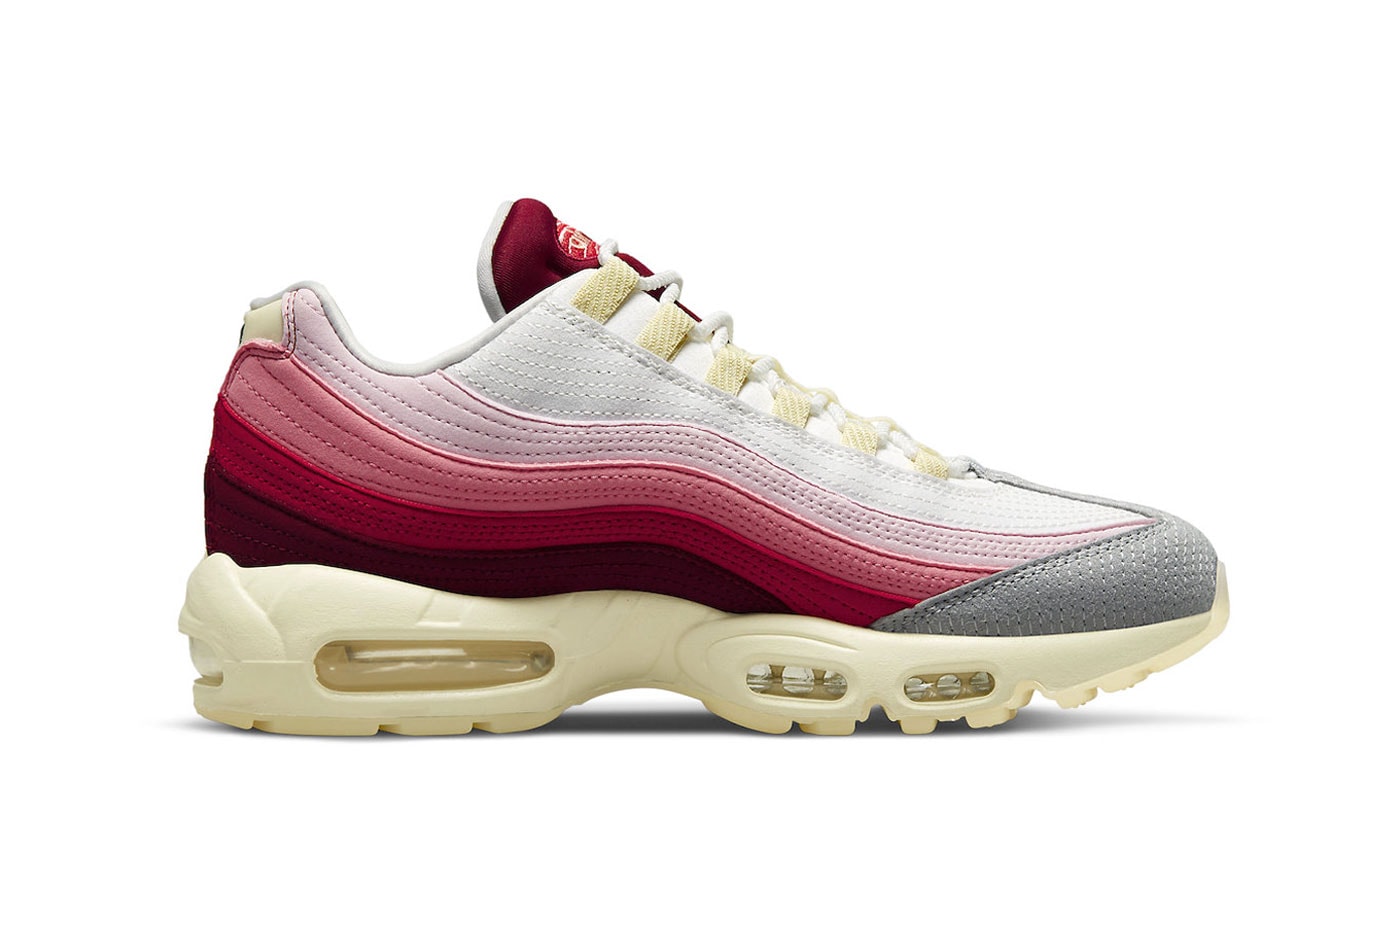 Nike AIr Max 95 Anatomy of Air DM0012 600 red white cream gray release info date price